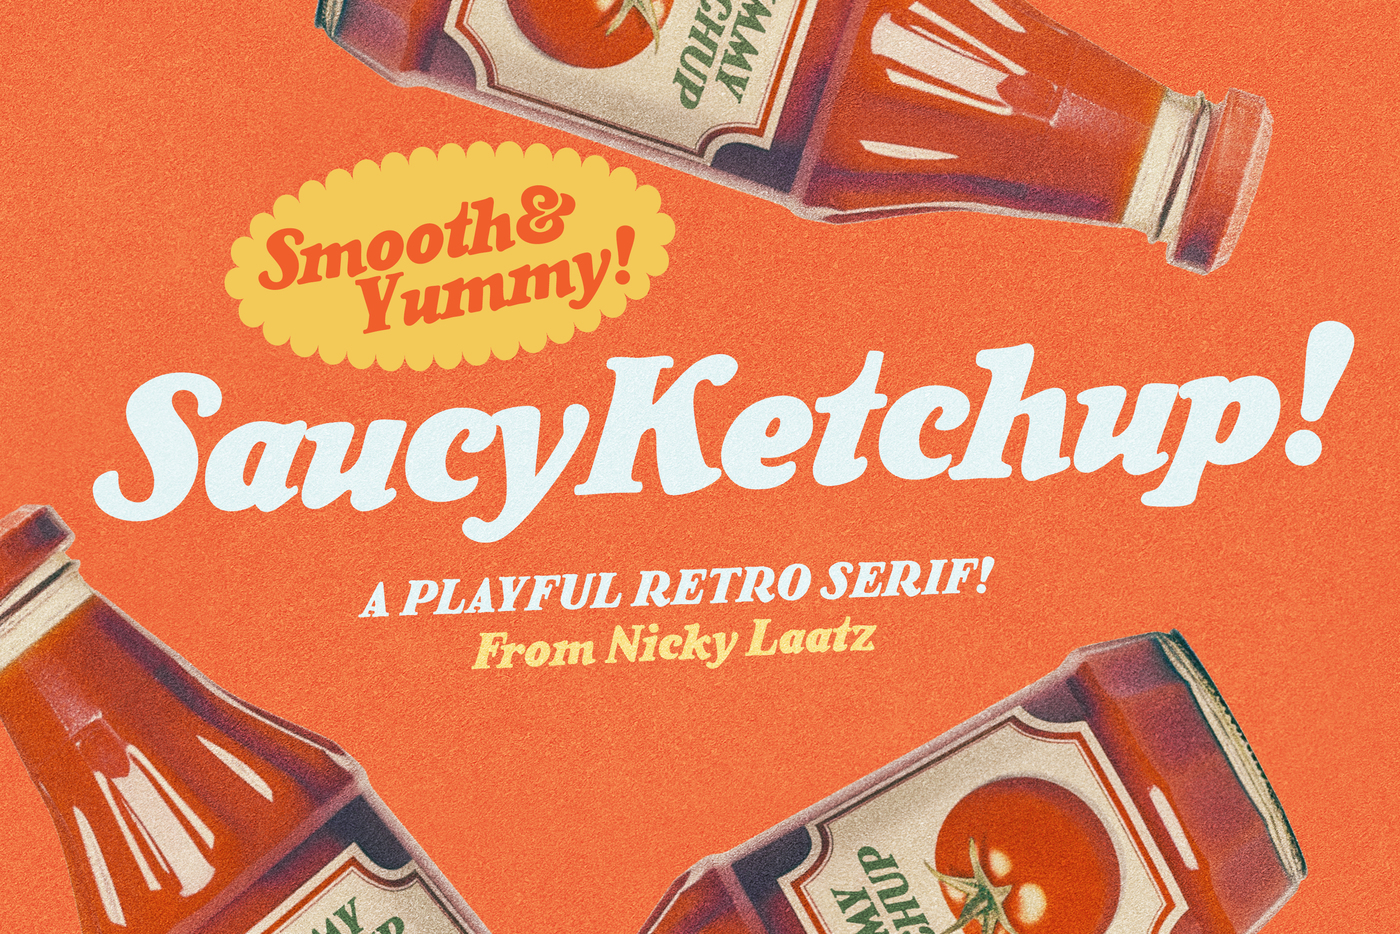 Saucy Ketchup Retro Serif main product image by Nicky Laatz